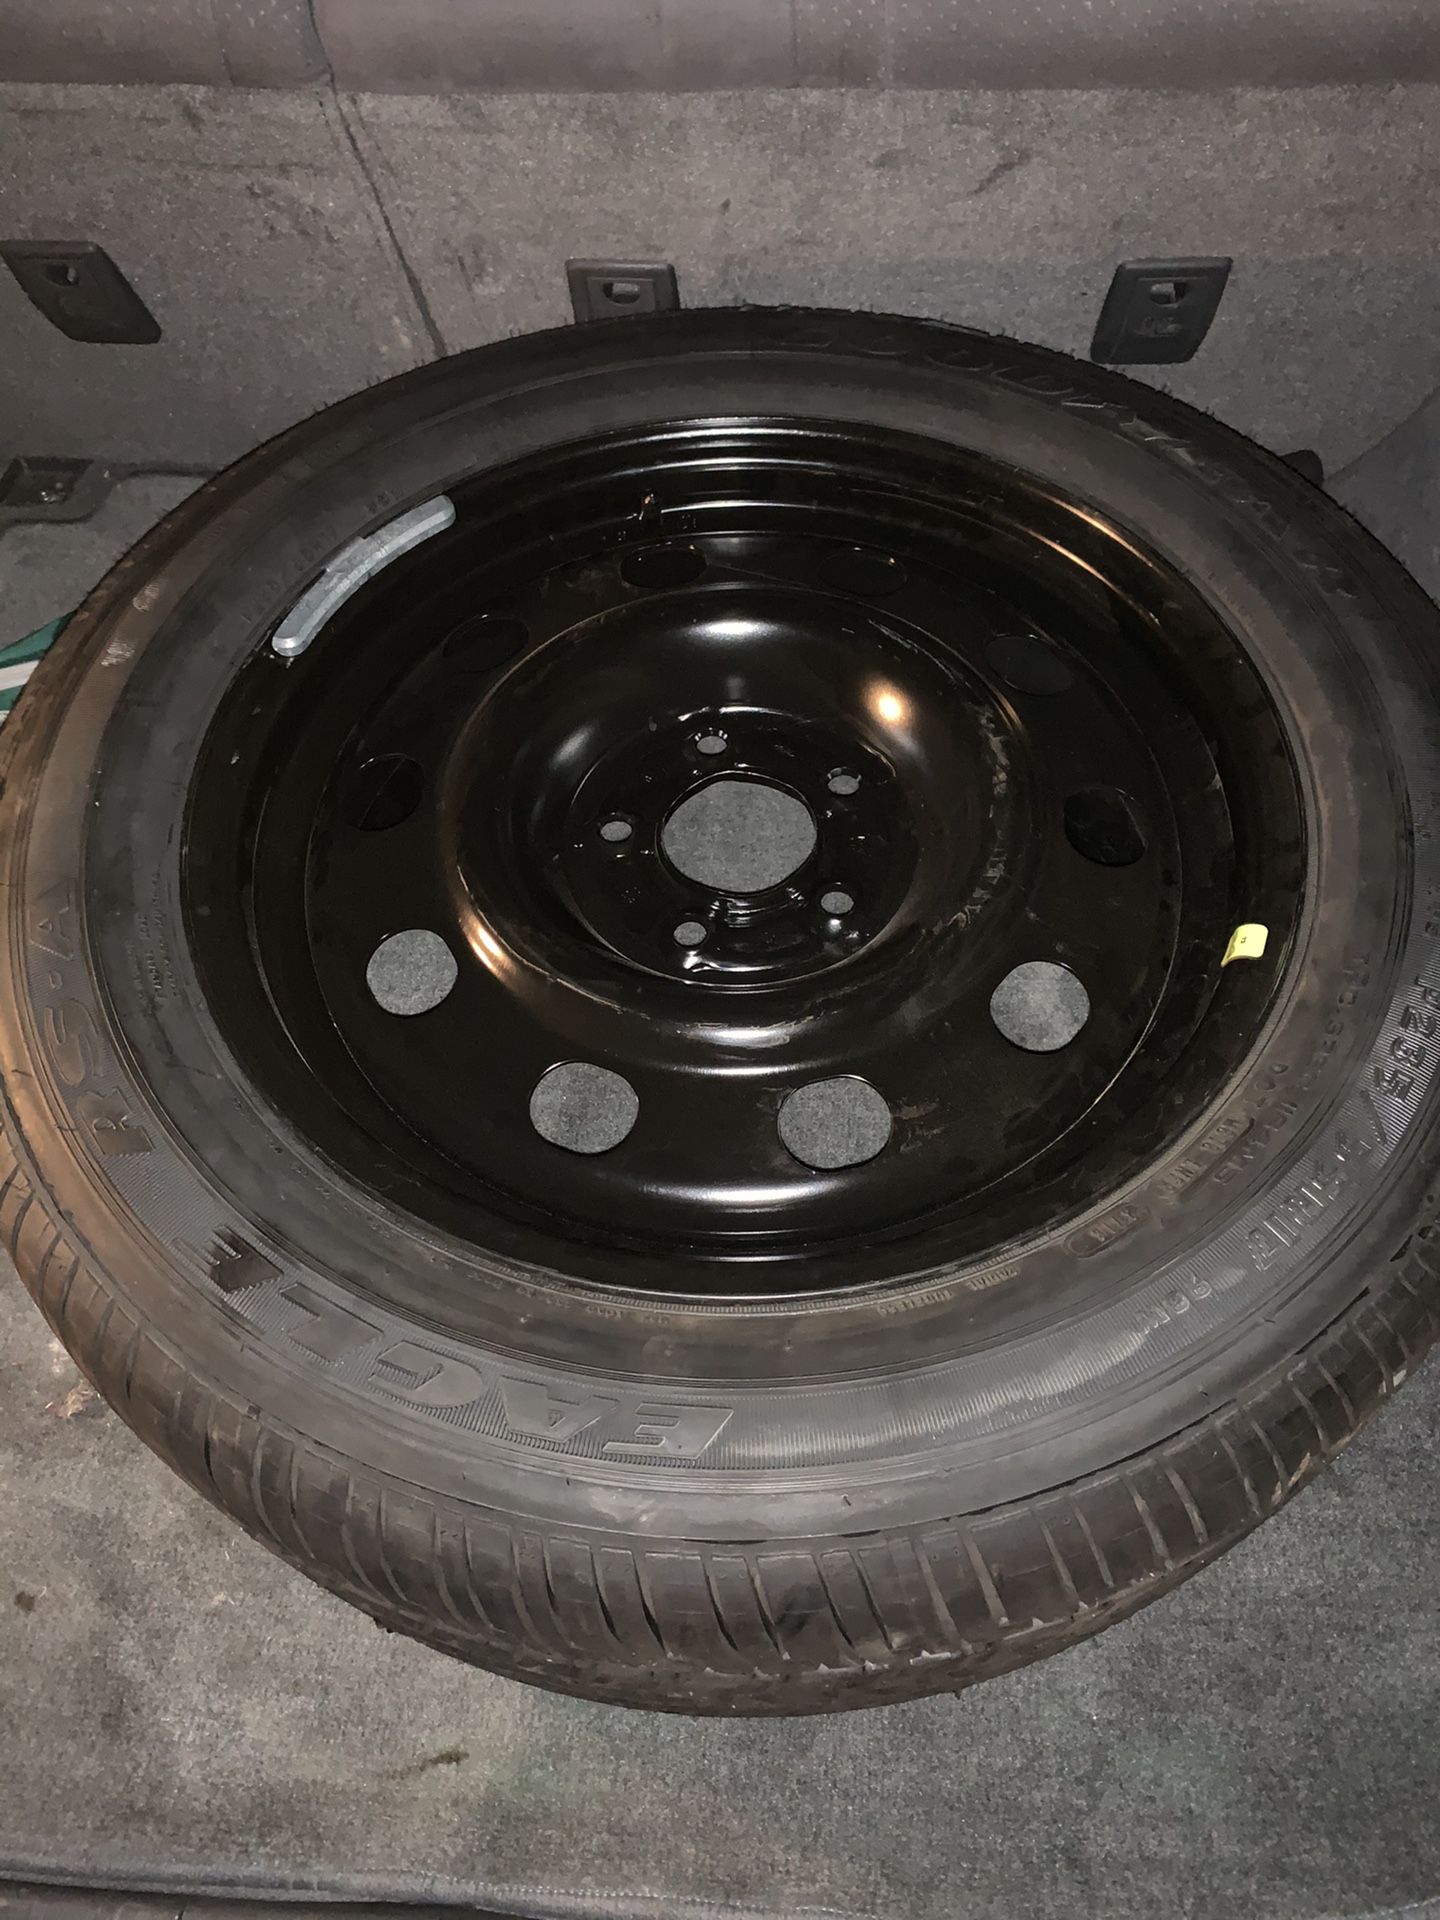 Brand new tire and rim for Ford Crown Victoria Police Interceptor 235/55/17